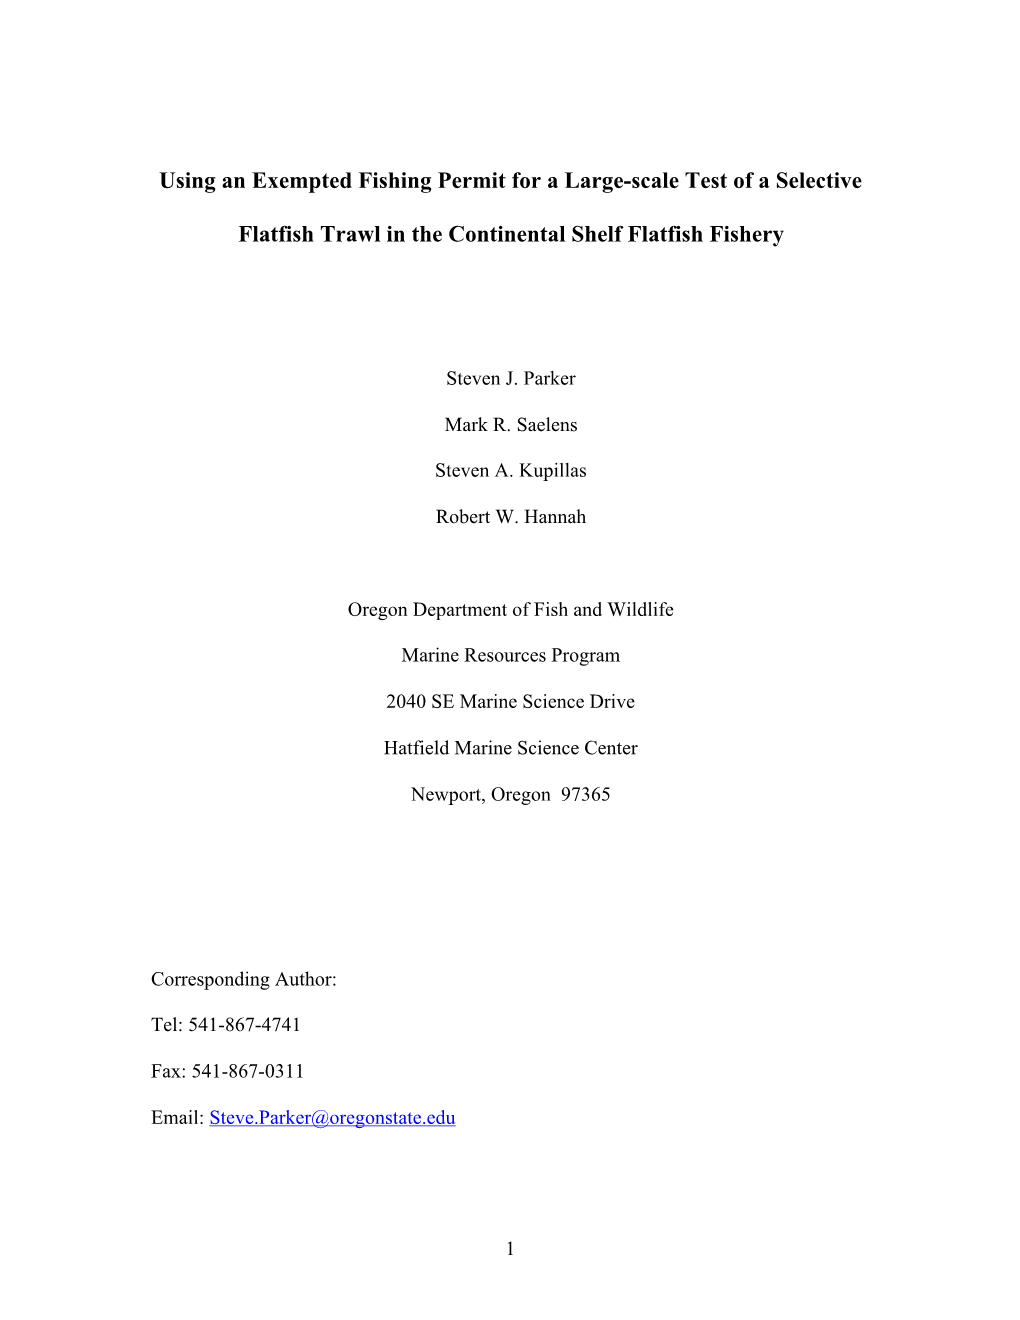 Using an Exempted Fishing Permit for a Large-Scale Test of a Selective